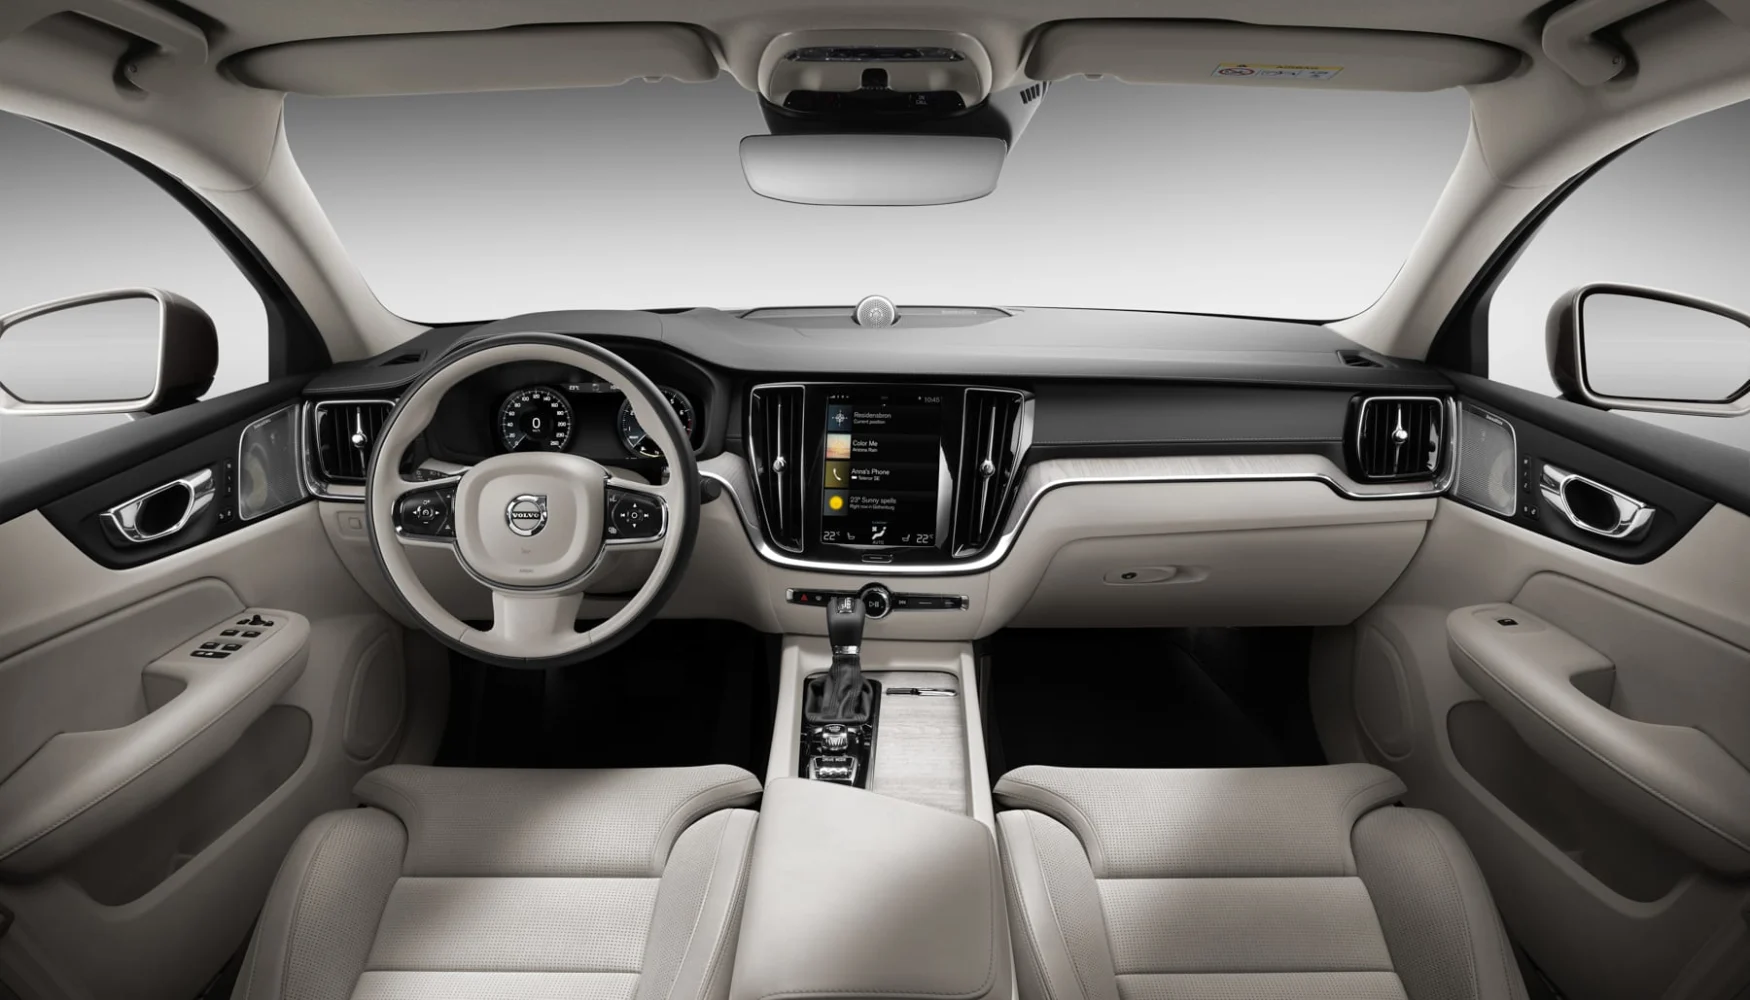 Volvo extends over-the-air software updates to all its vehicles